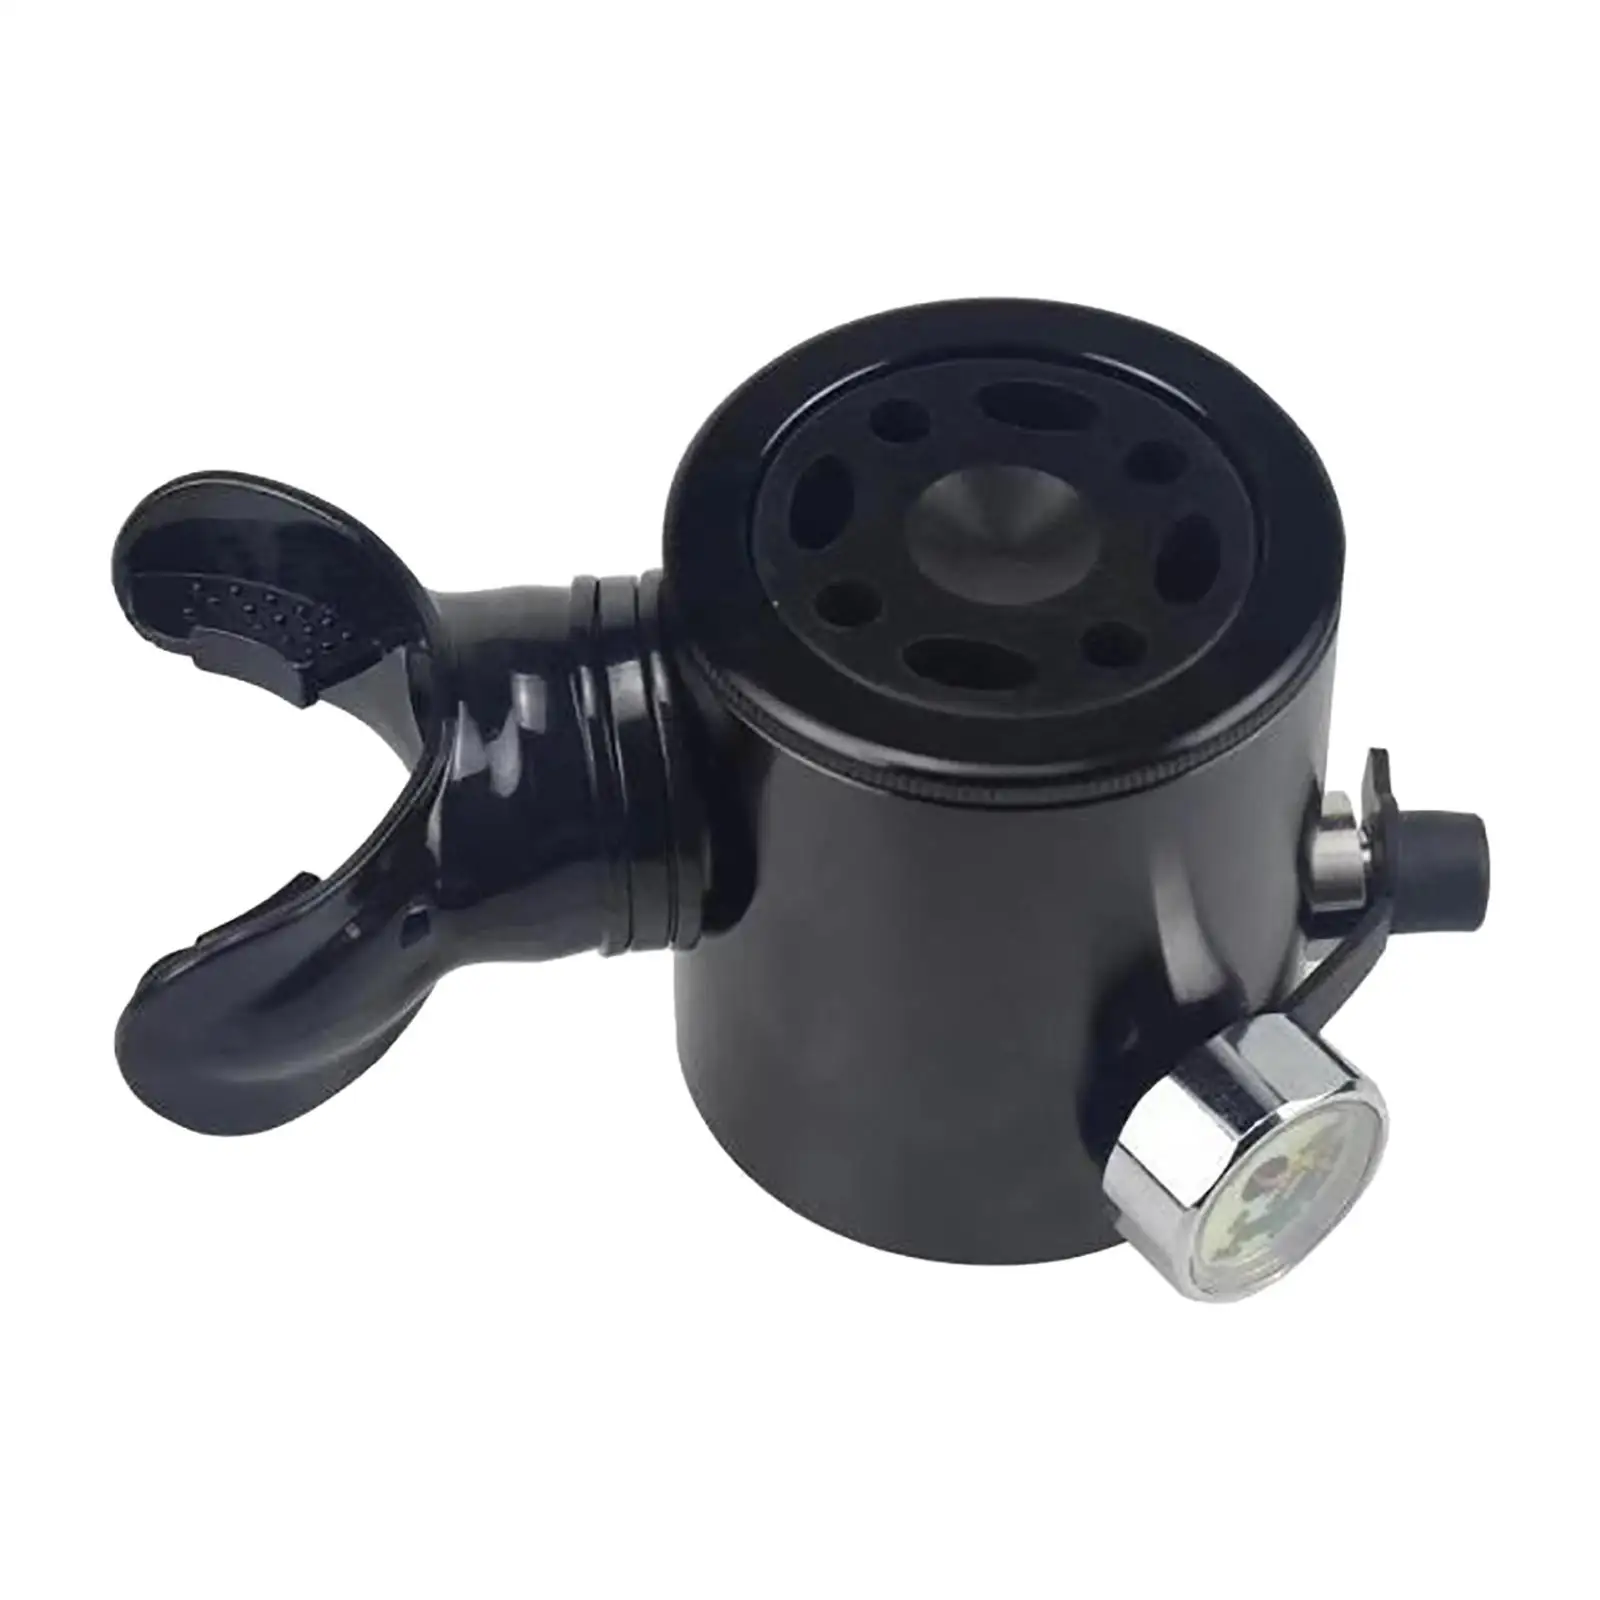 

Scuba Diving Tank Adapter Breathing Refill Adaptor Head Mouth Device